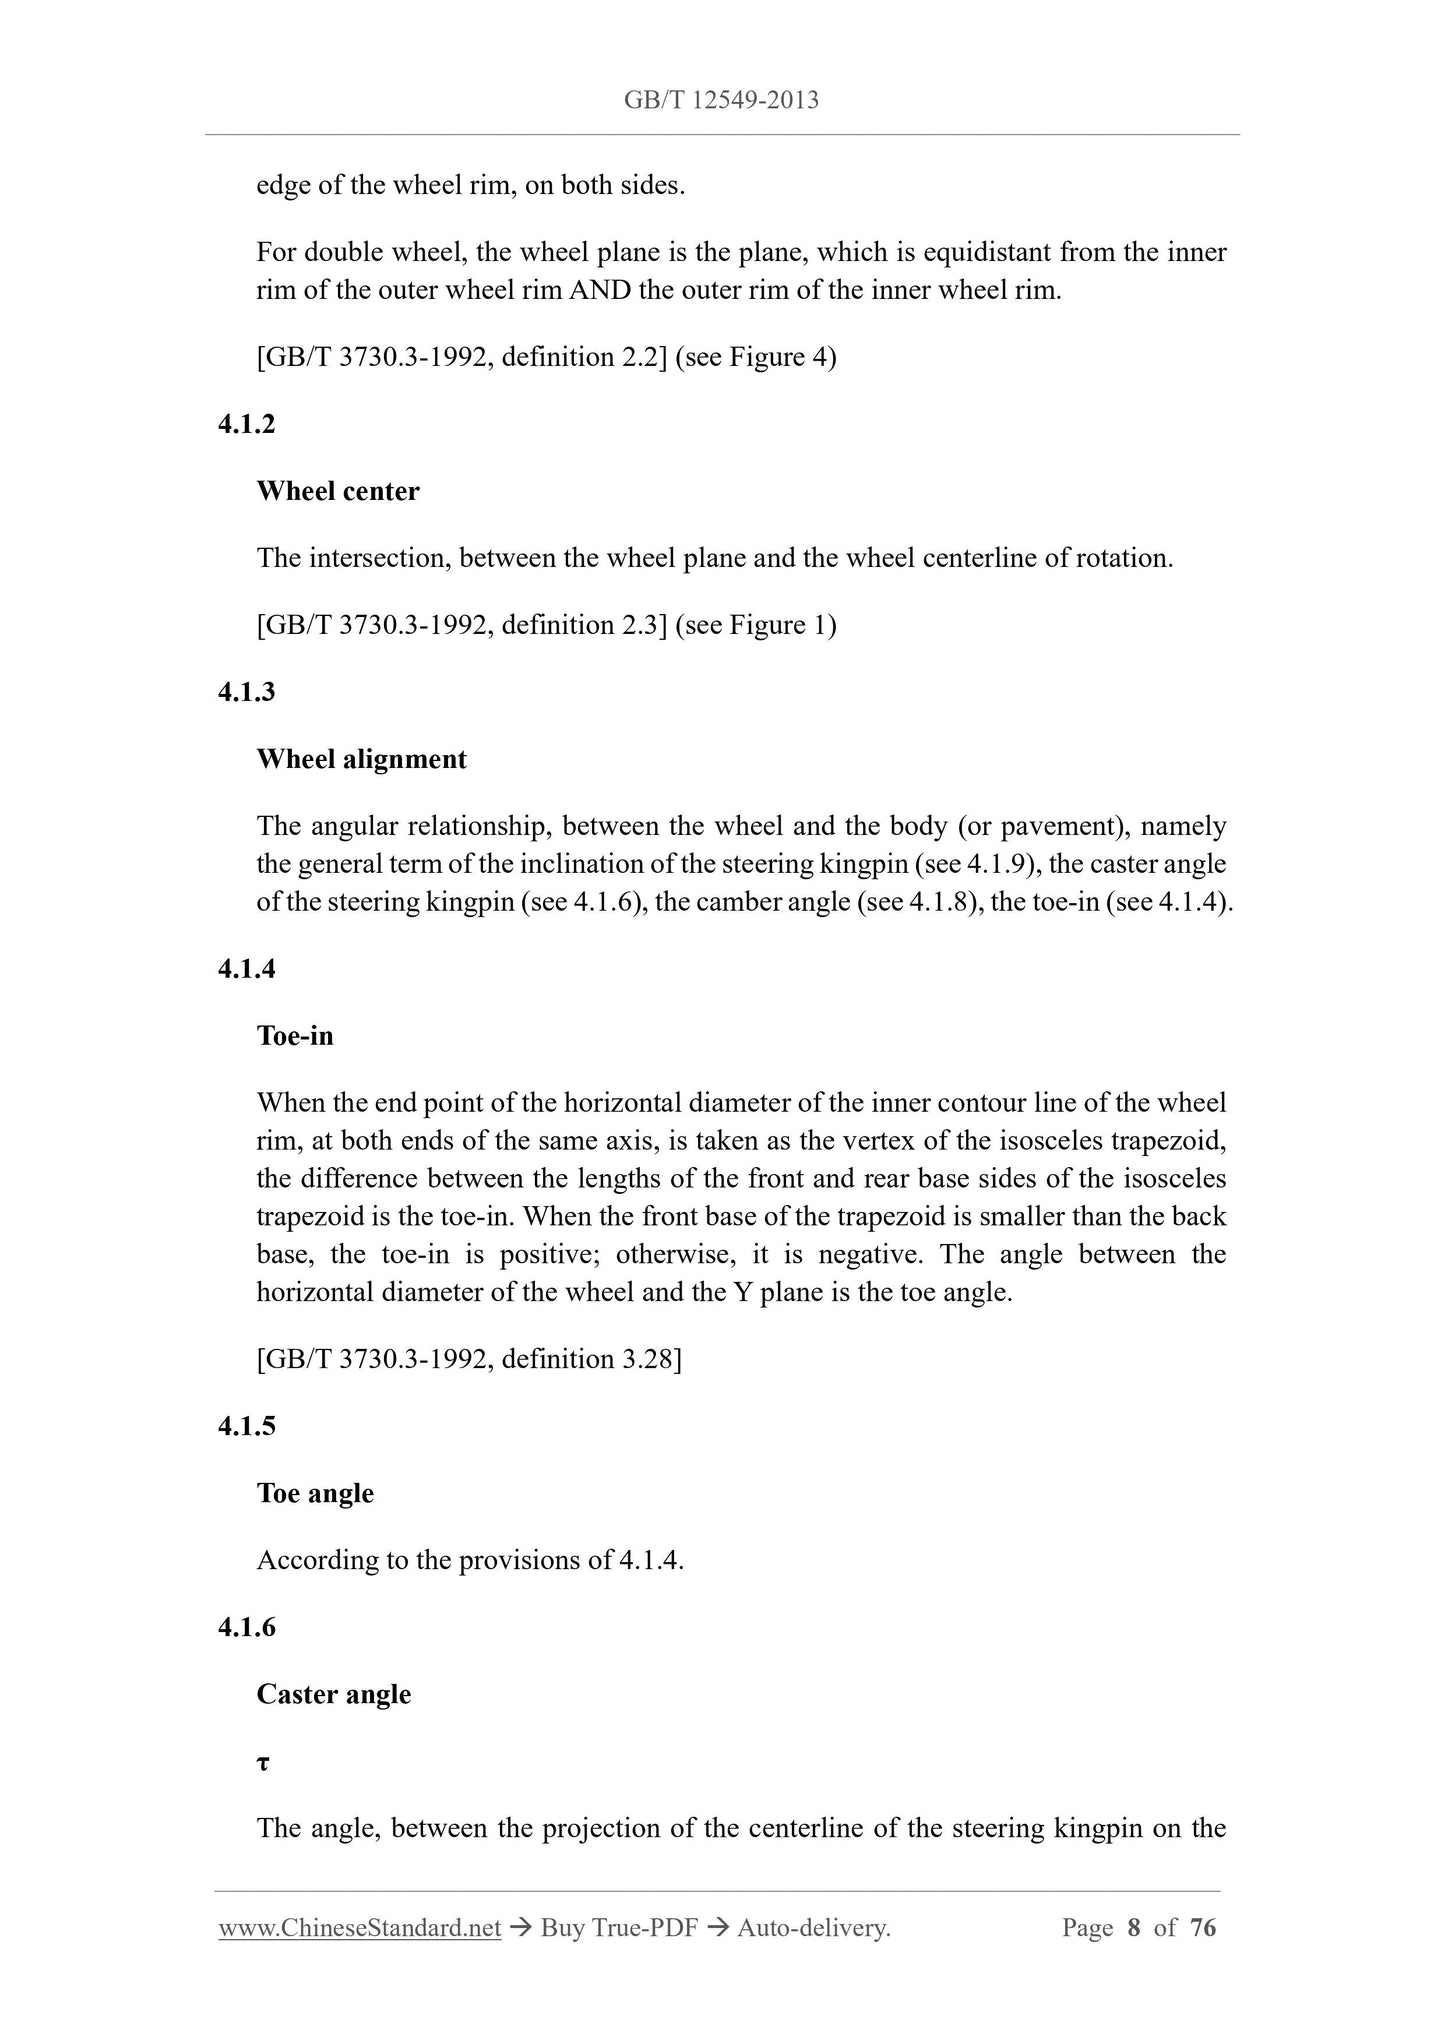 GB/T 12549-2013 Page 6